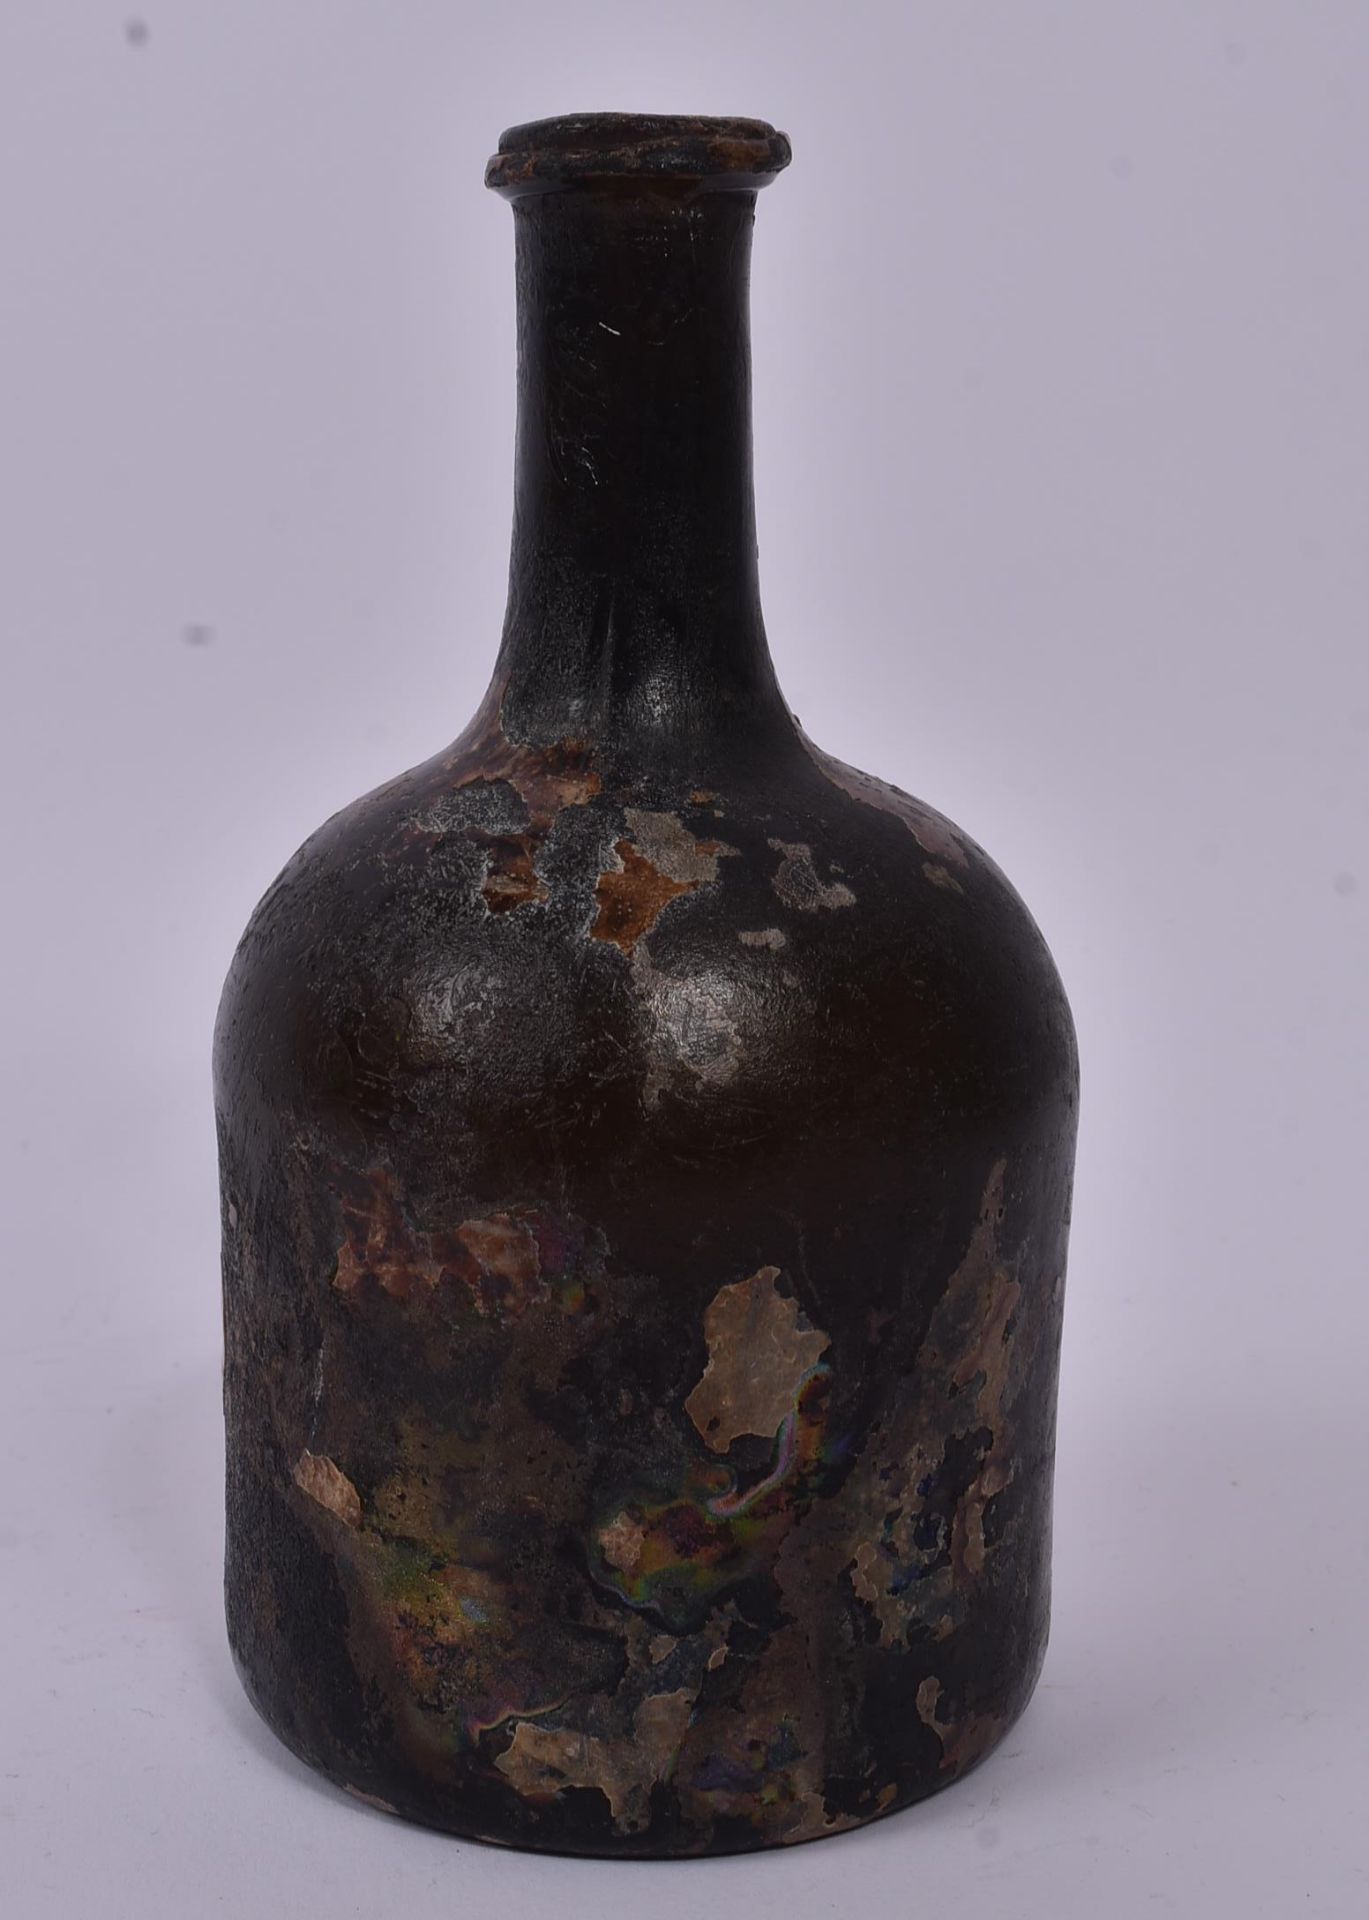 18TH CENTURY CIRCA 1700S GLASS SHIP WRECK WINE BOTTLE - Image 2 of 5